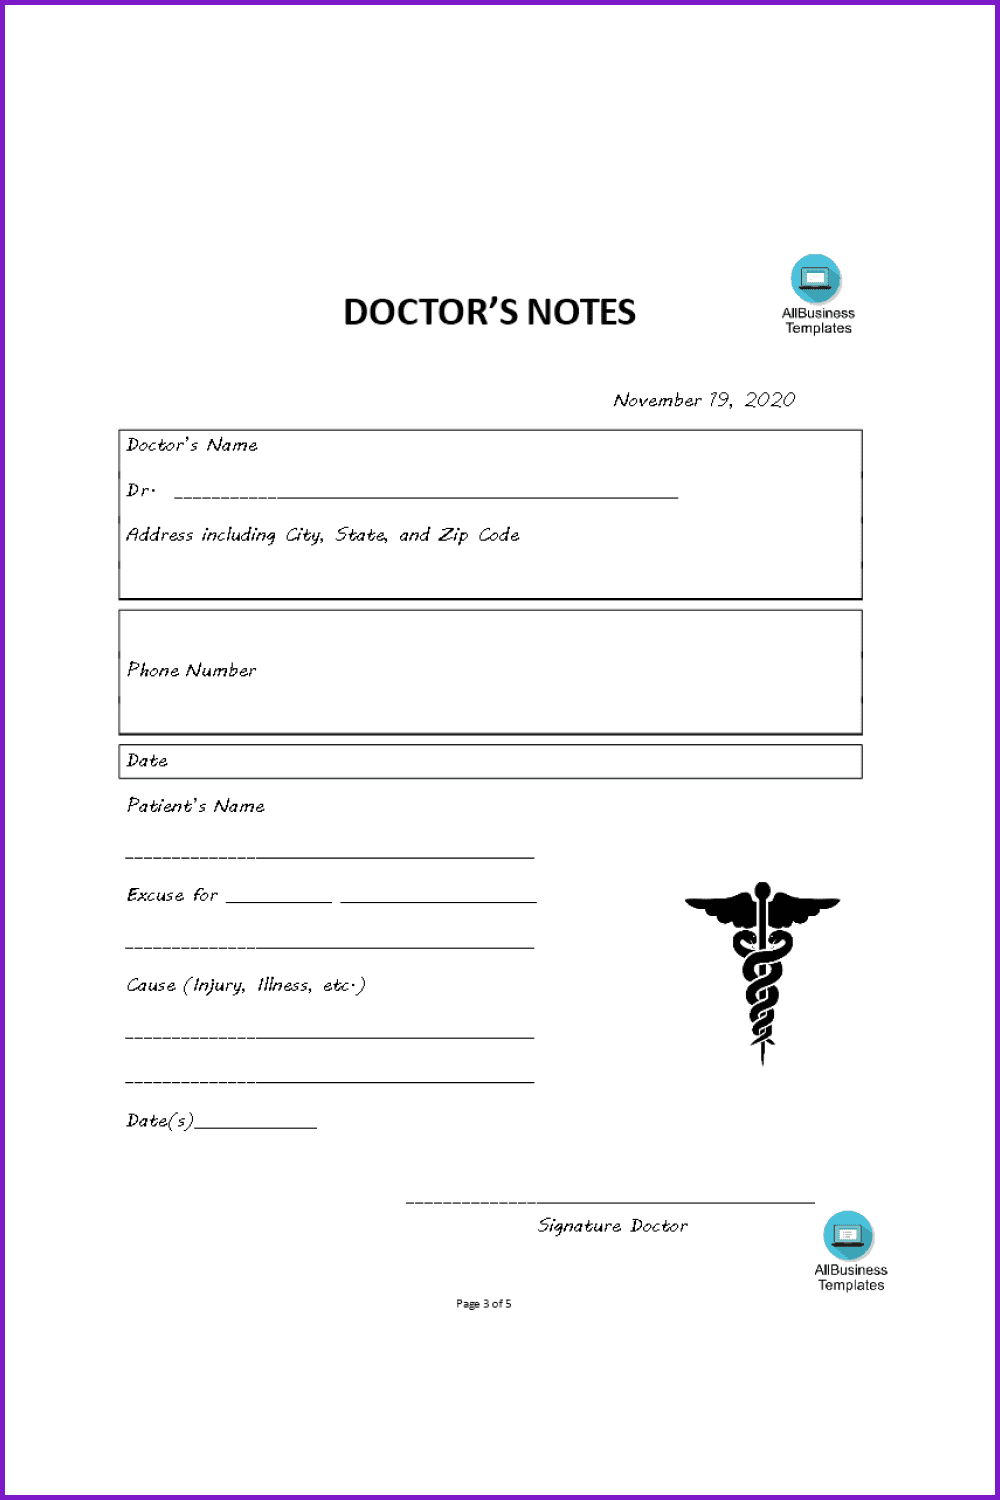 A quality and easy-to-edit doctor’s excuse template.